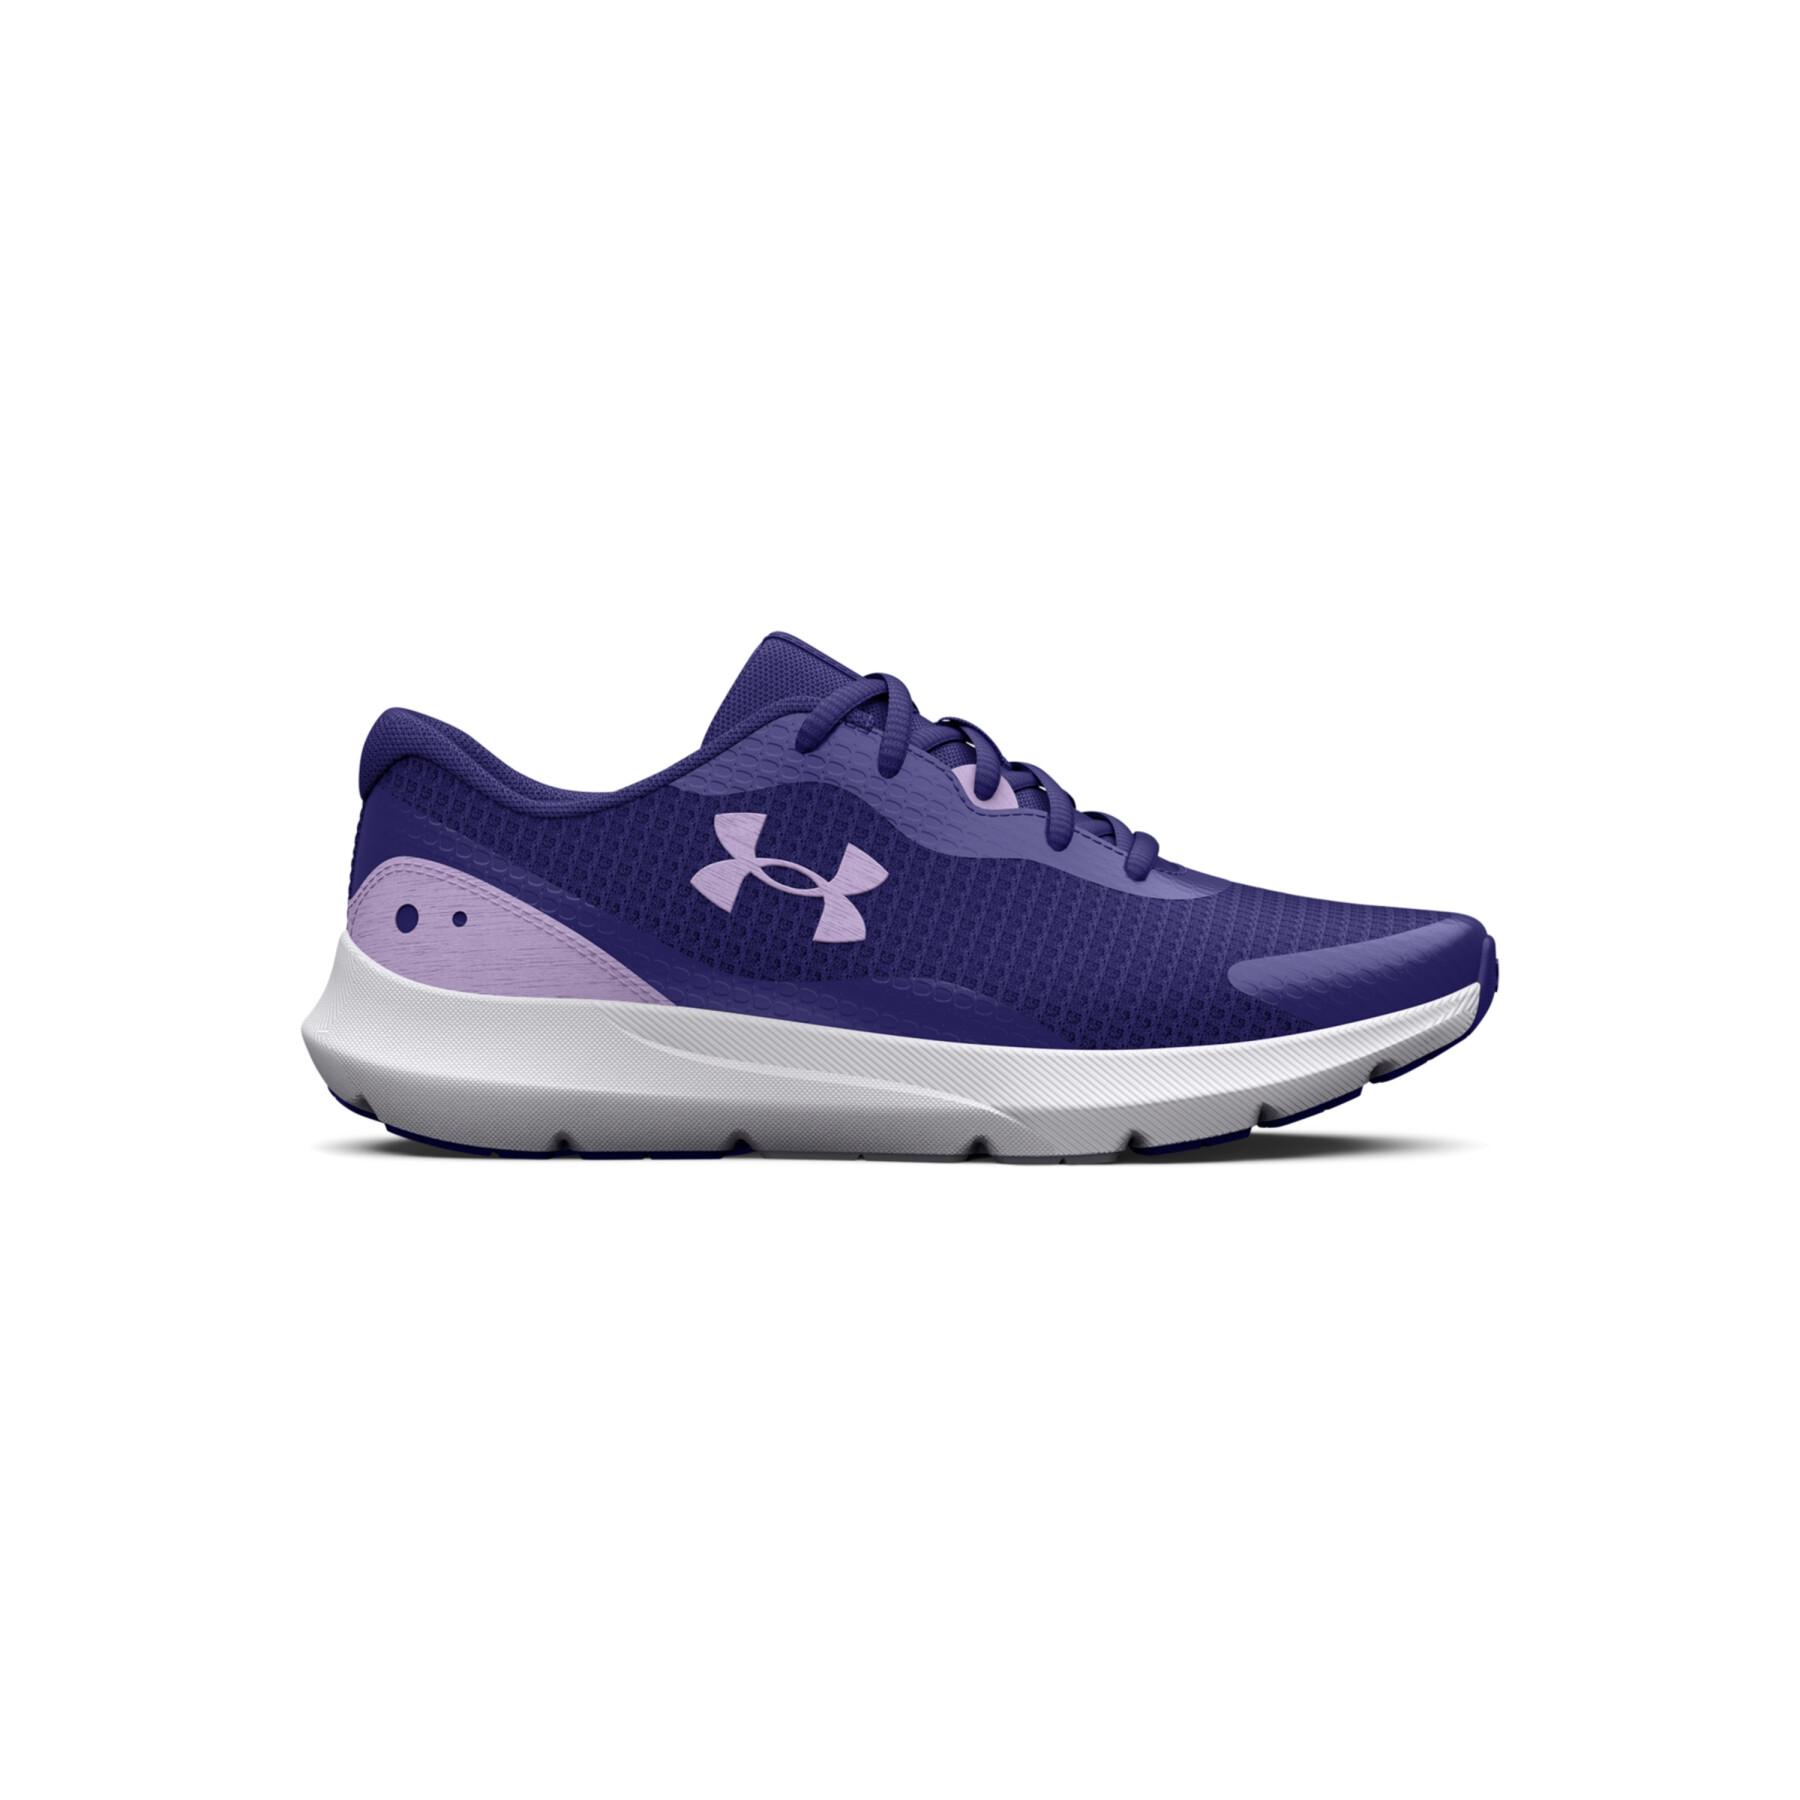 Zapatos de mujer running Under Armour Surge 3